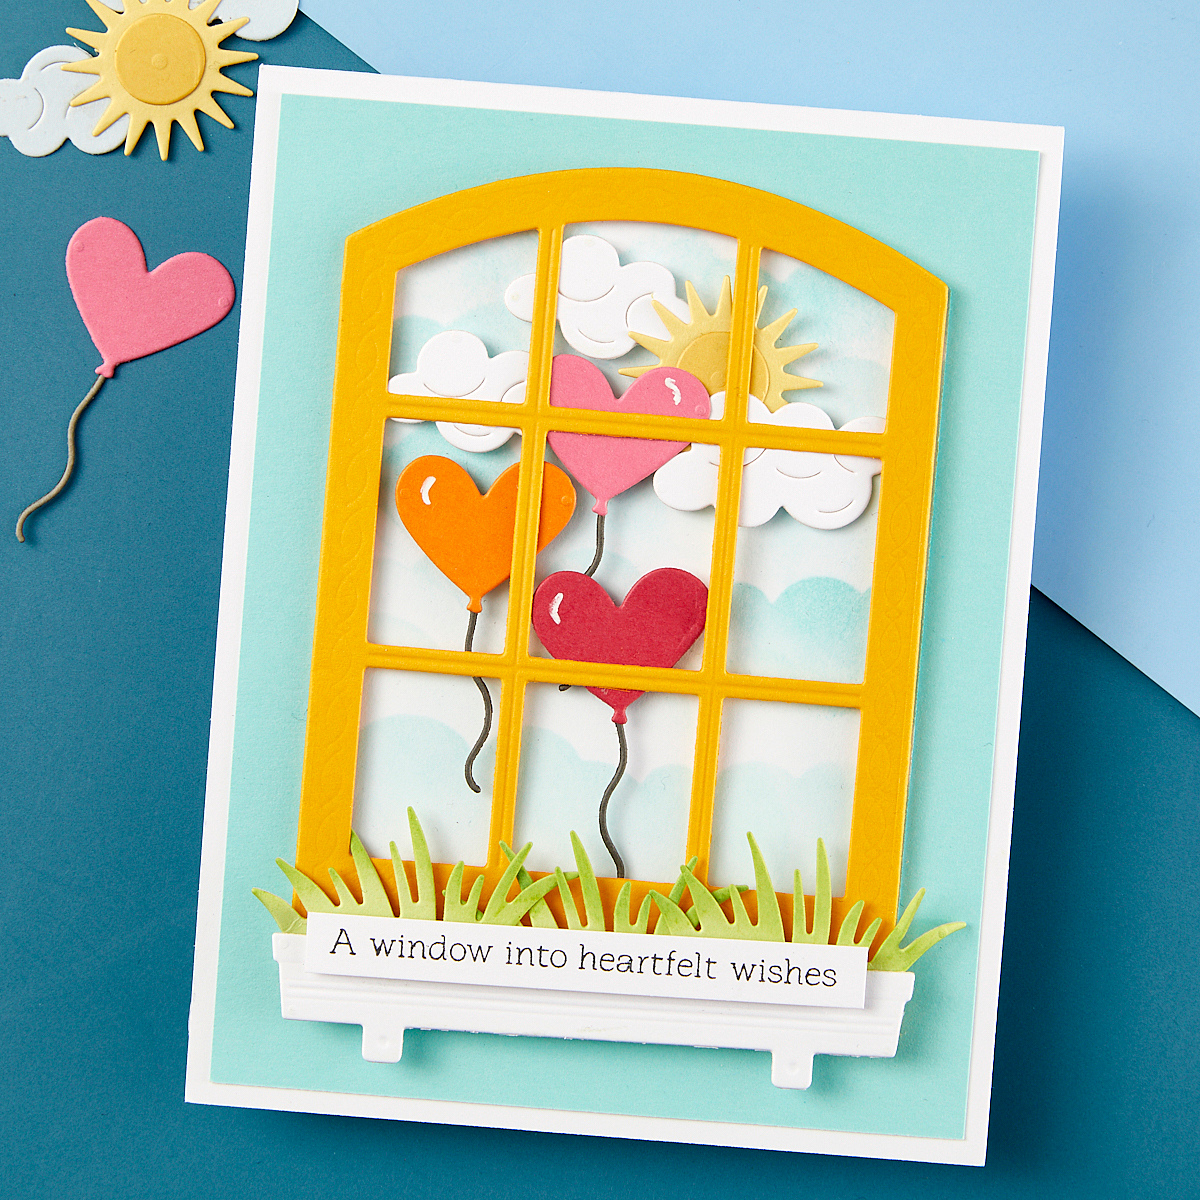 Spellbinders - Up In The Air View Etched Dies from the Windows with a View Collection by Tina Smith